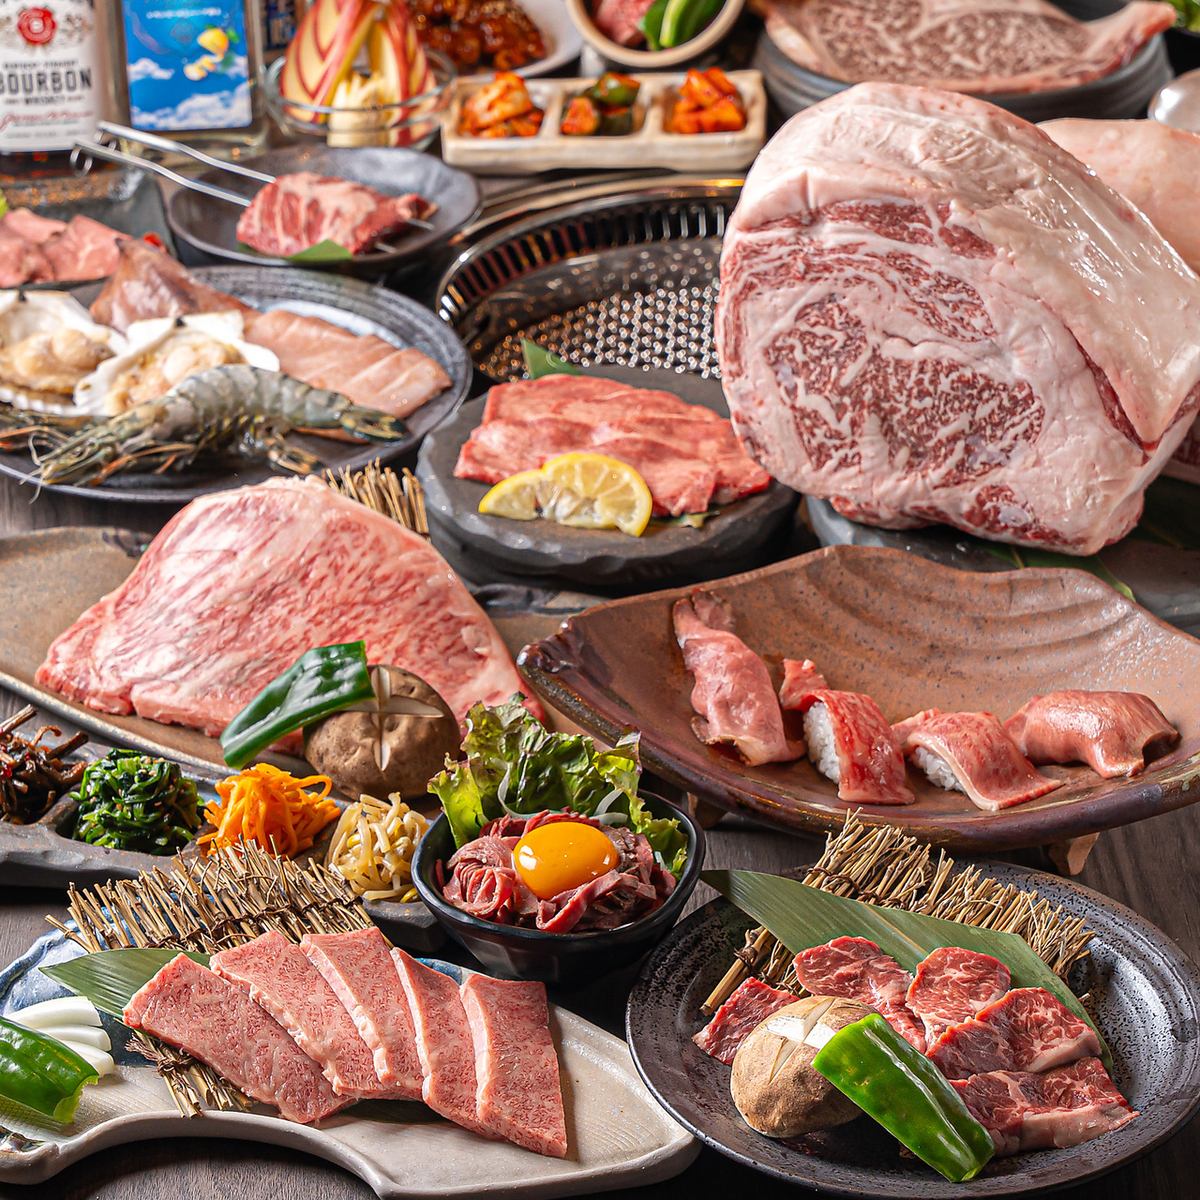 We offer carefully selected yakiniku, meat sushi, and Korean cuisine at reasonable prices.